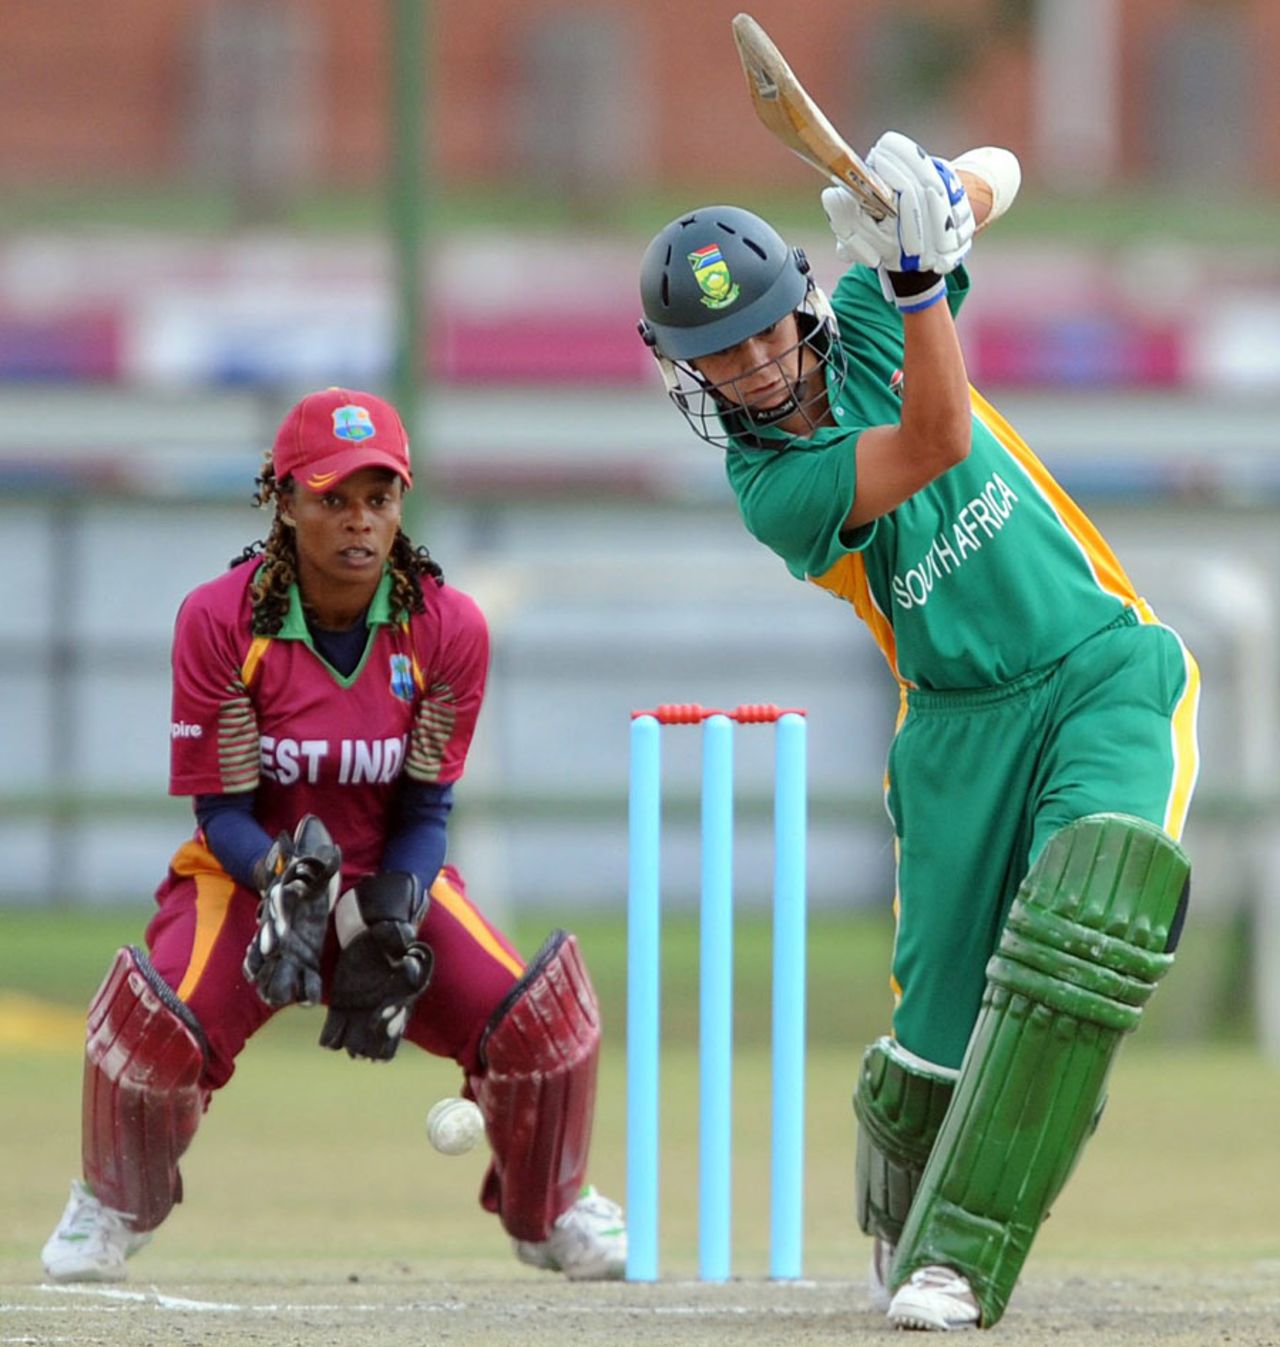 South Africa's Marizanne Kapp plays a shot on the off side, South Africa Women v West Indies Women, ICC Women's Cricket Challenge, Potchefstroom, October 10, 2010